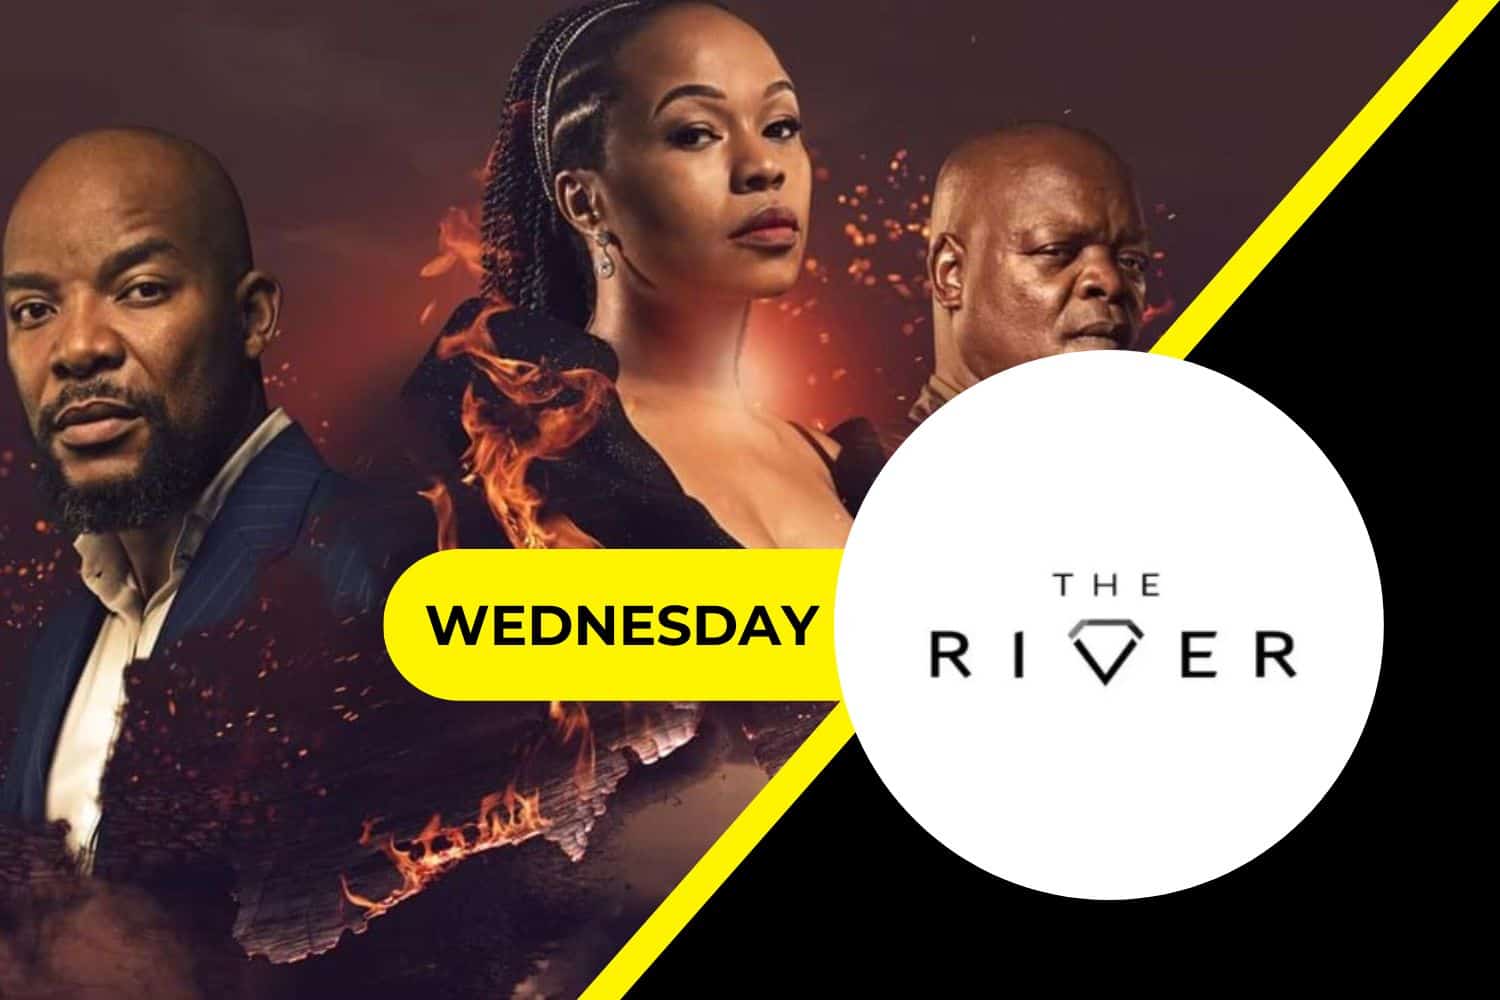 The River 22 March 2023 On today's episode S7 E513